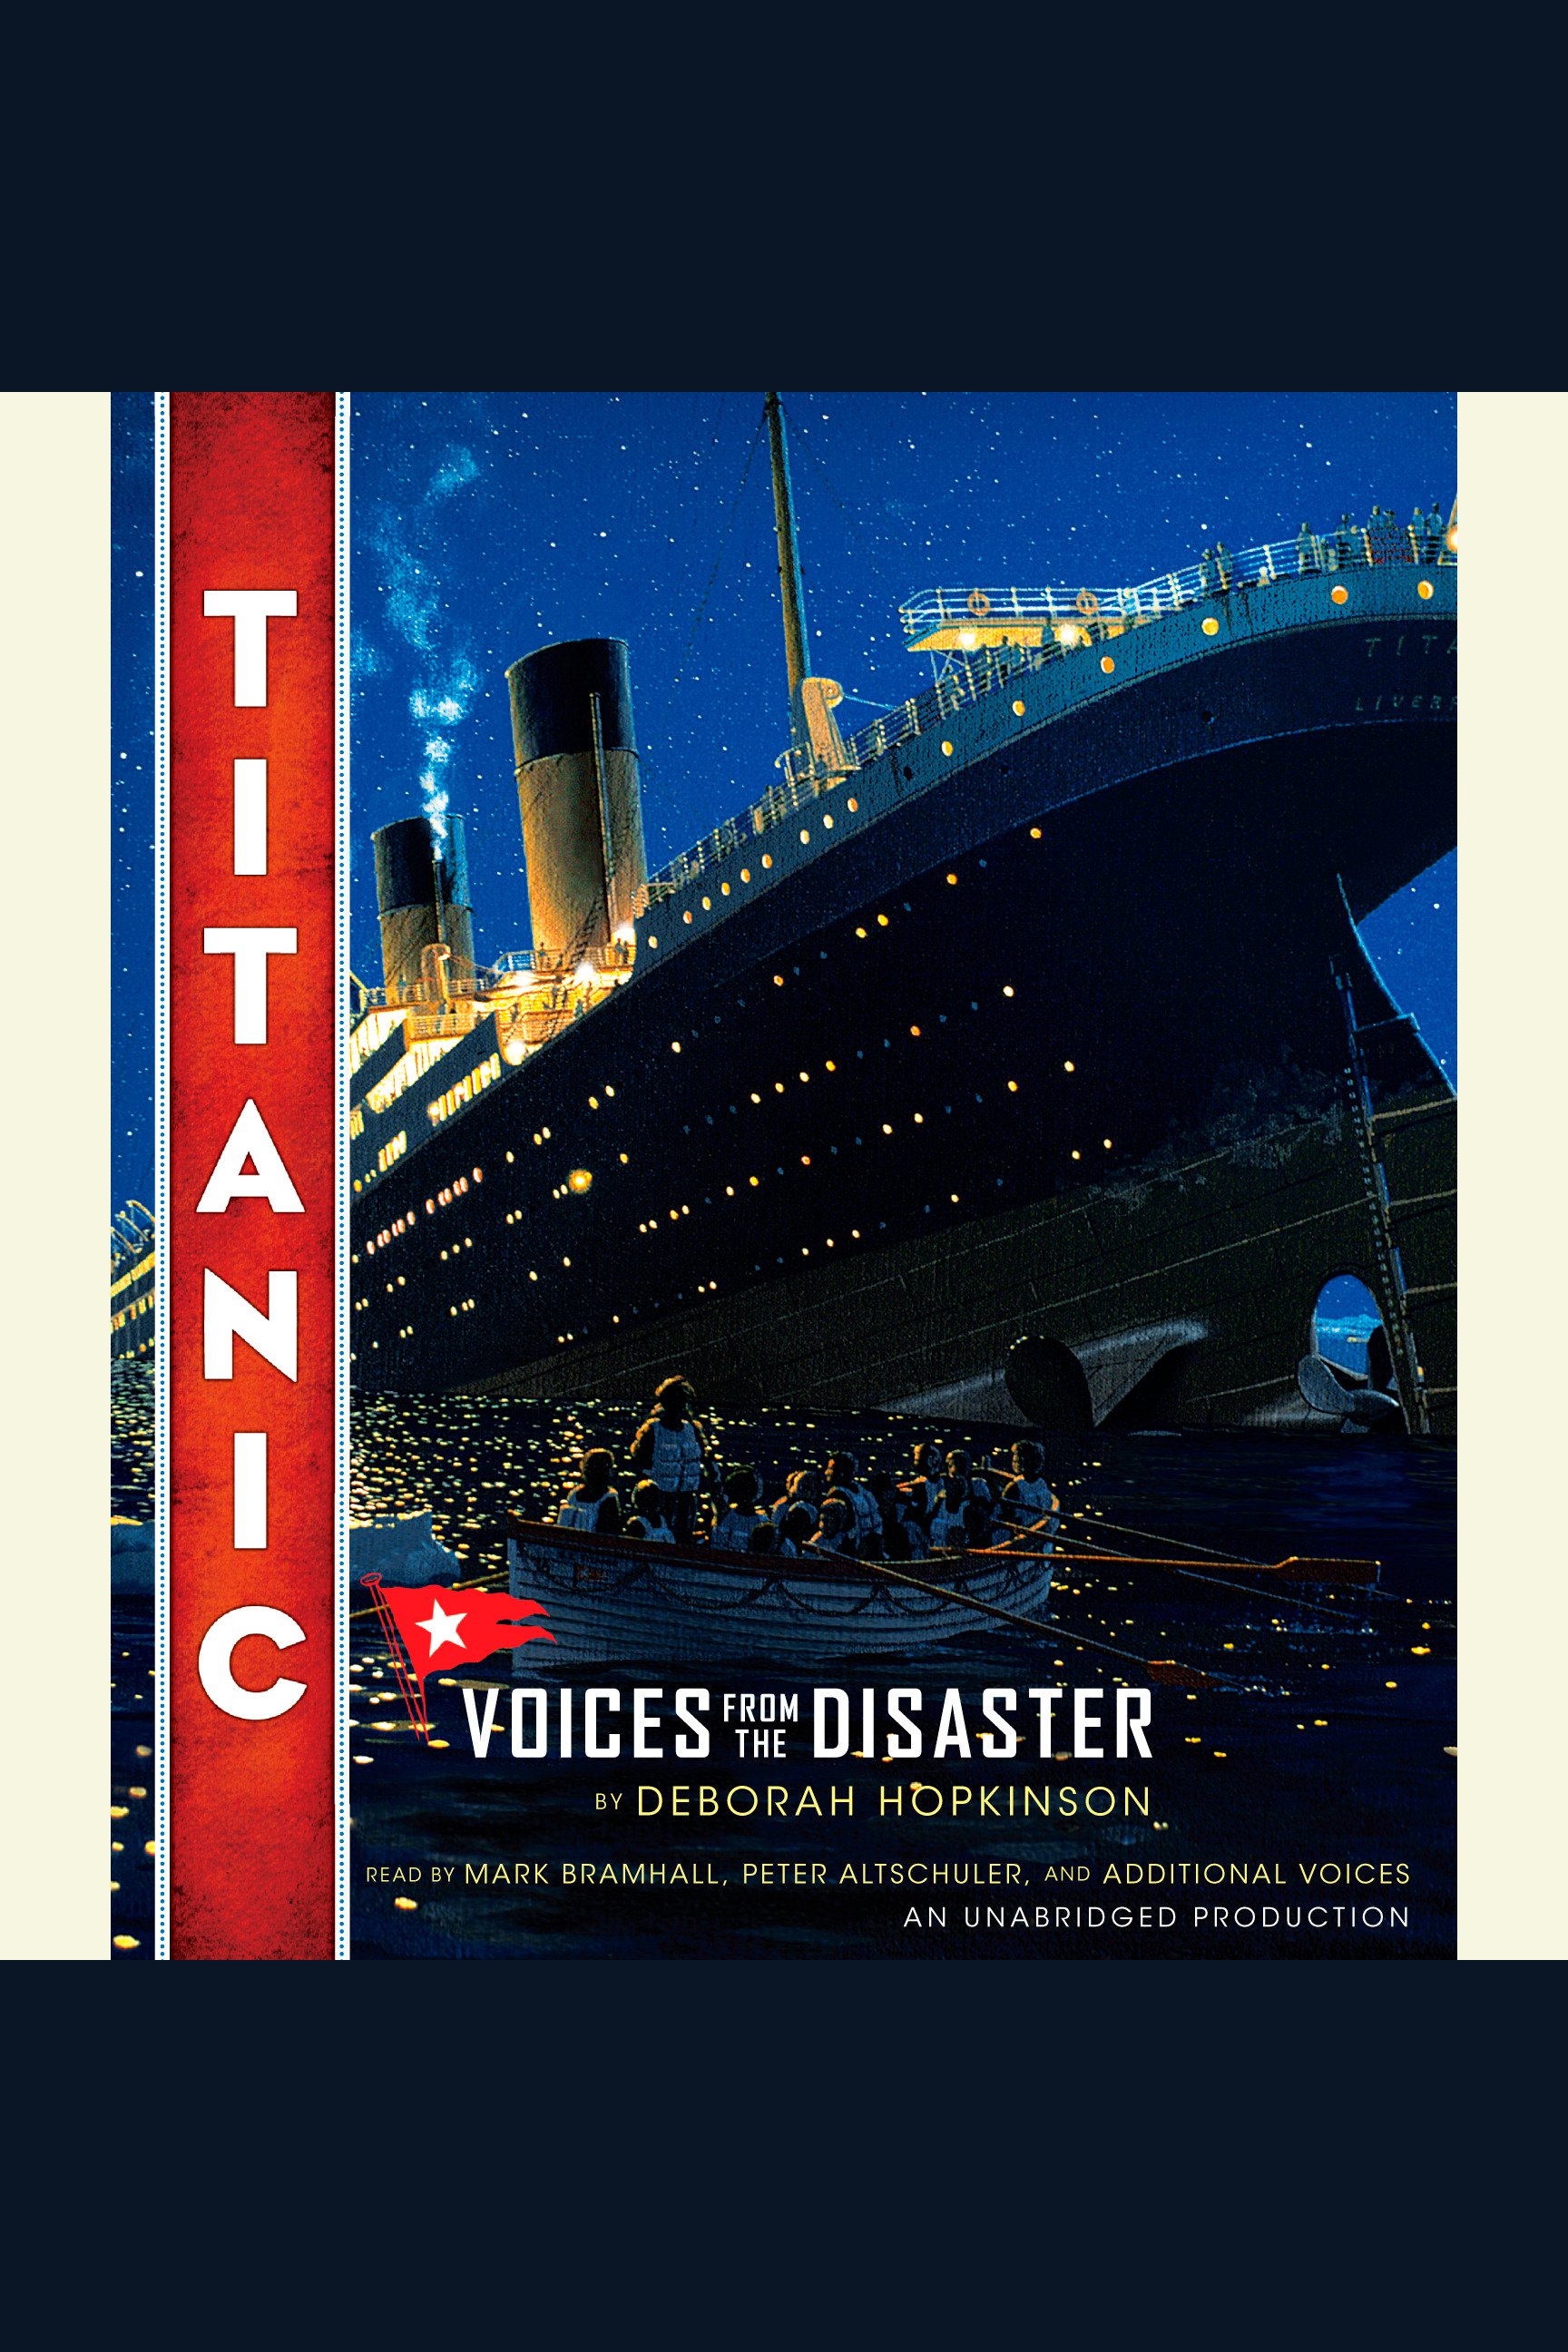 Titanic voices from the disaster cover image